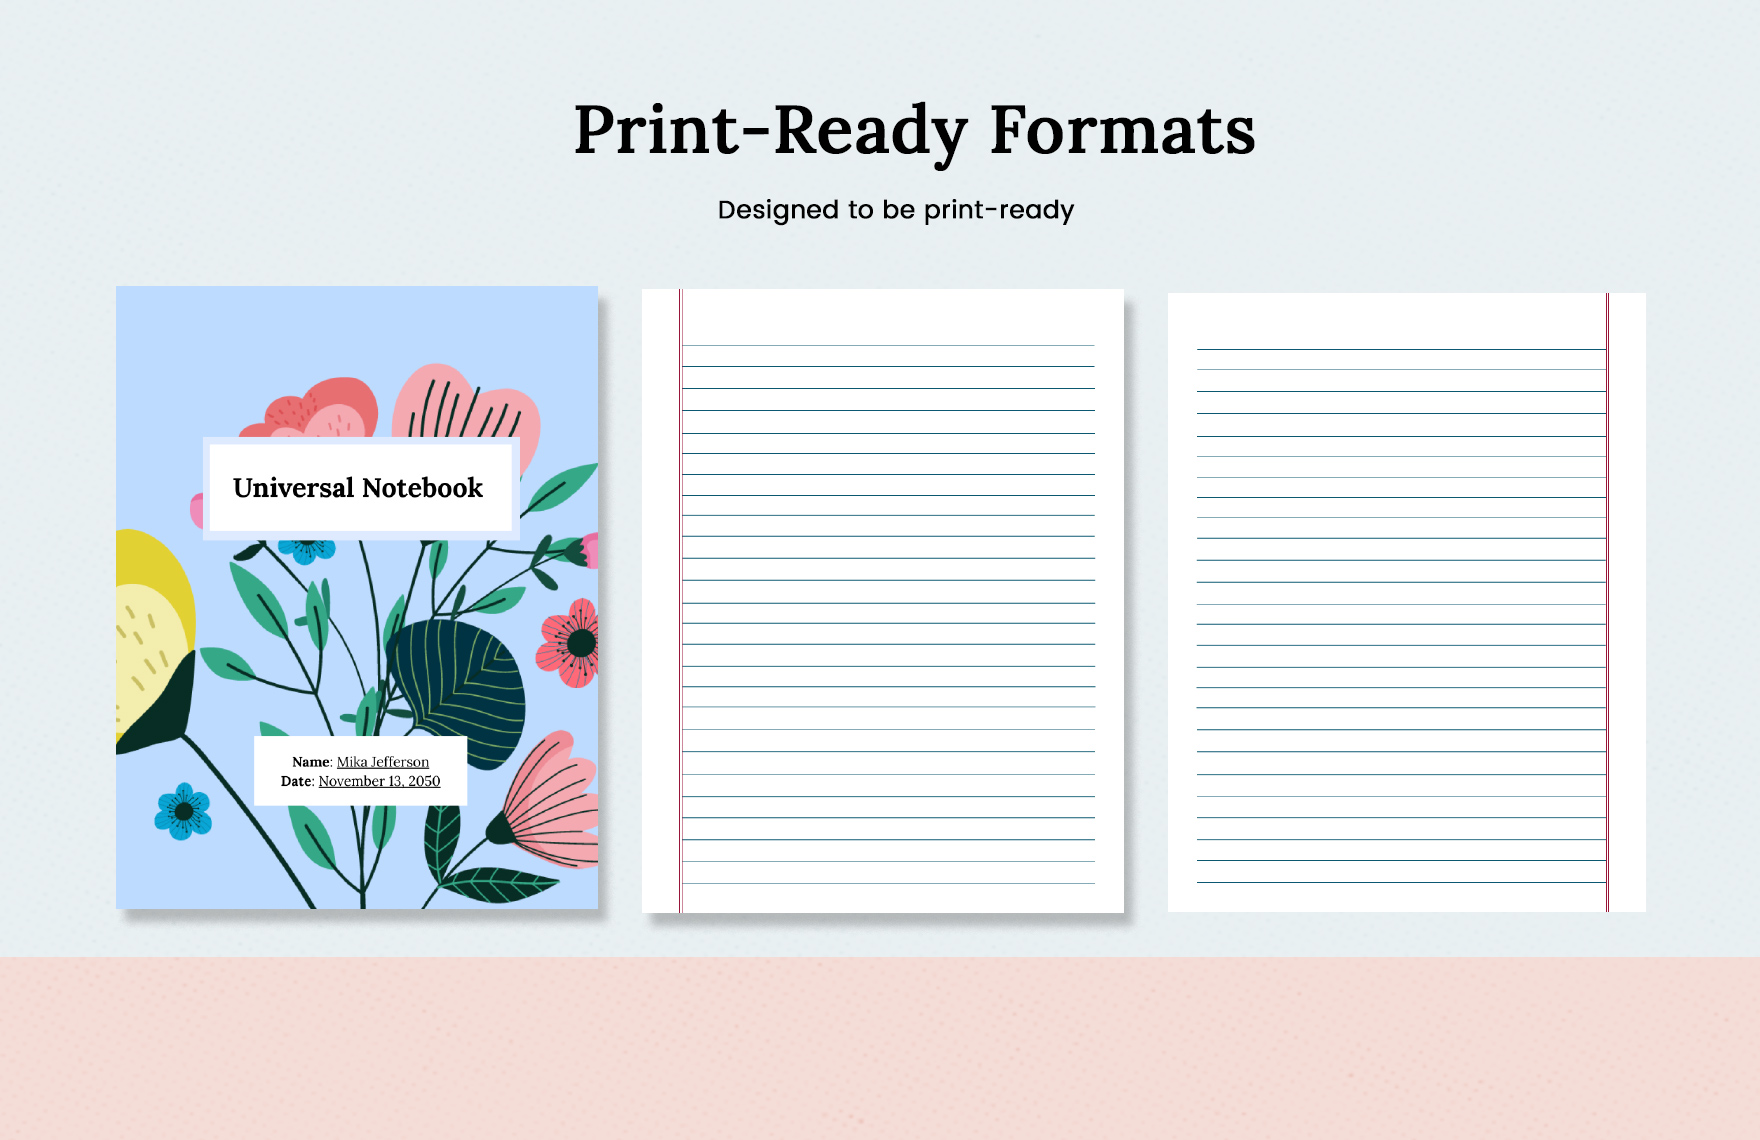 Printable Notebook Template